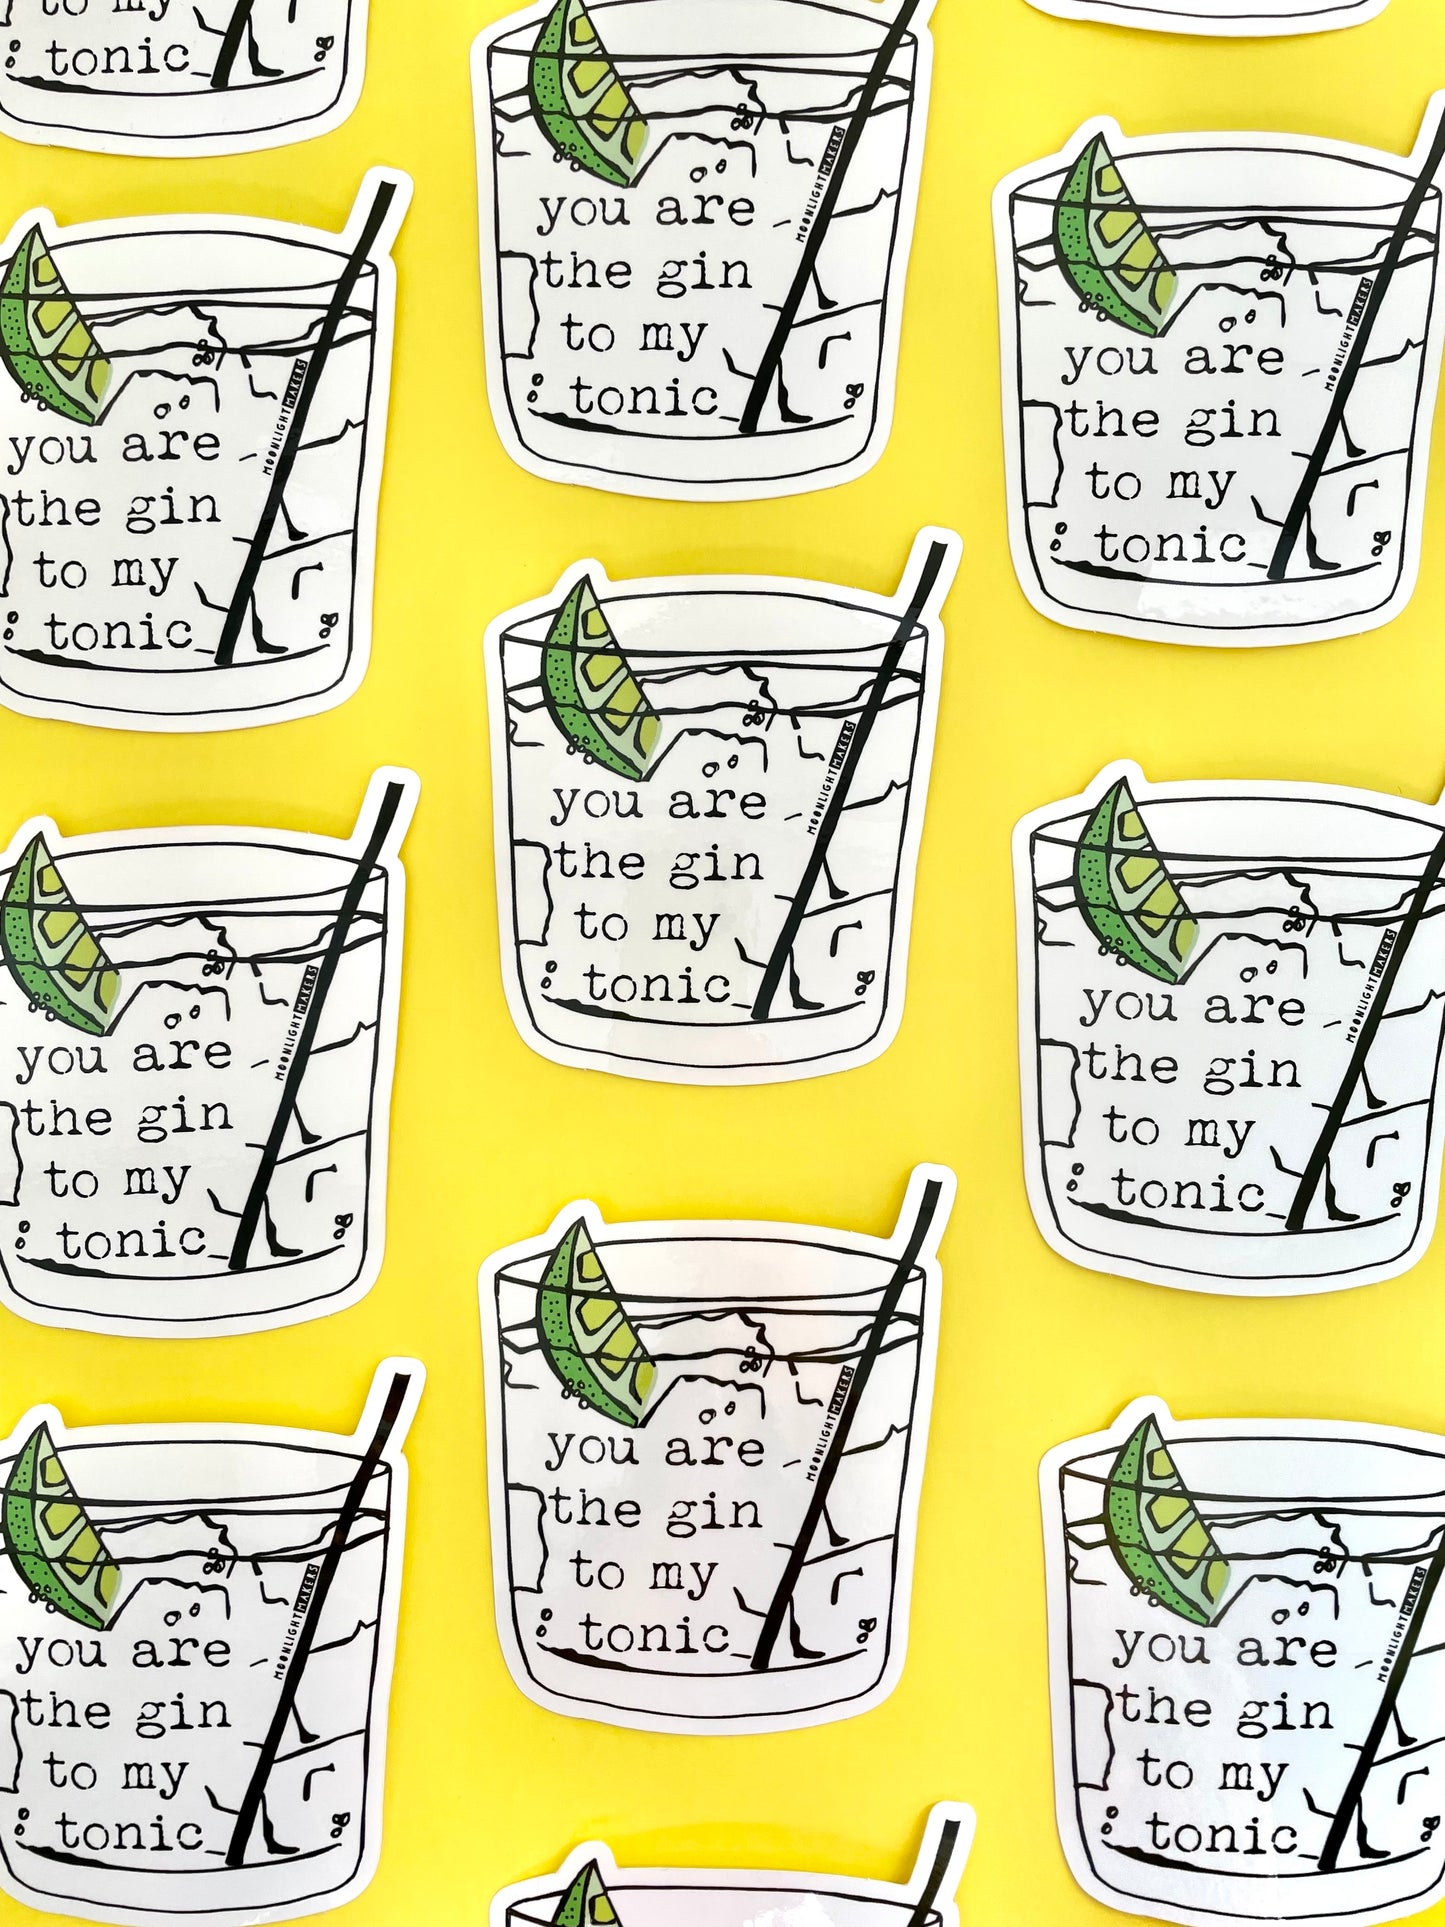 You Are The Gin To My Tonic - Die Cut Sticker - MoonlightMakers